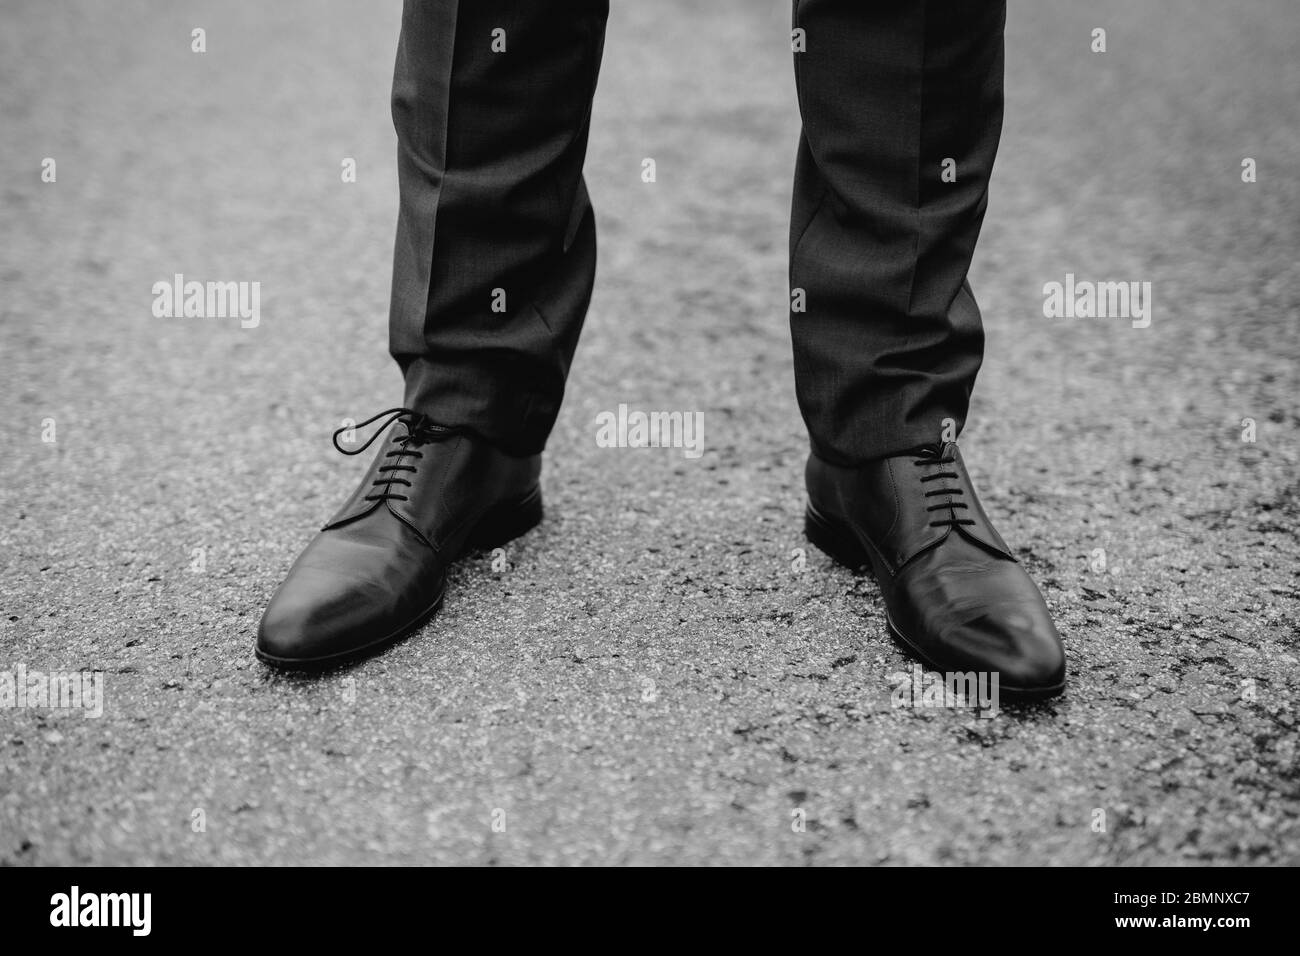 Groom's shoes close up Stock Photo